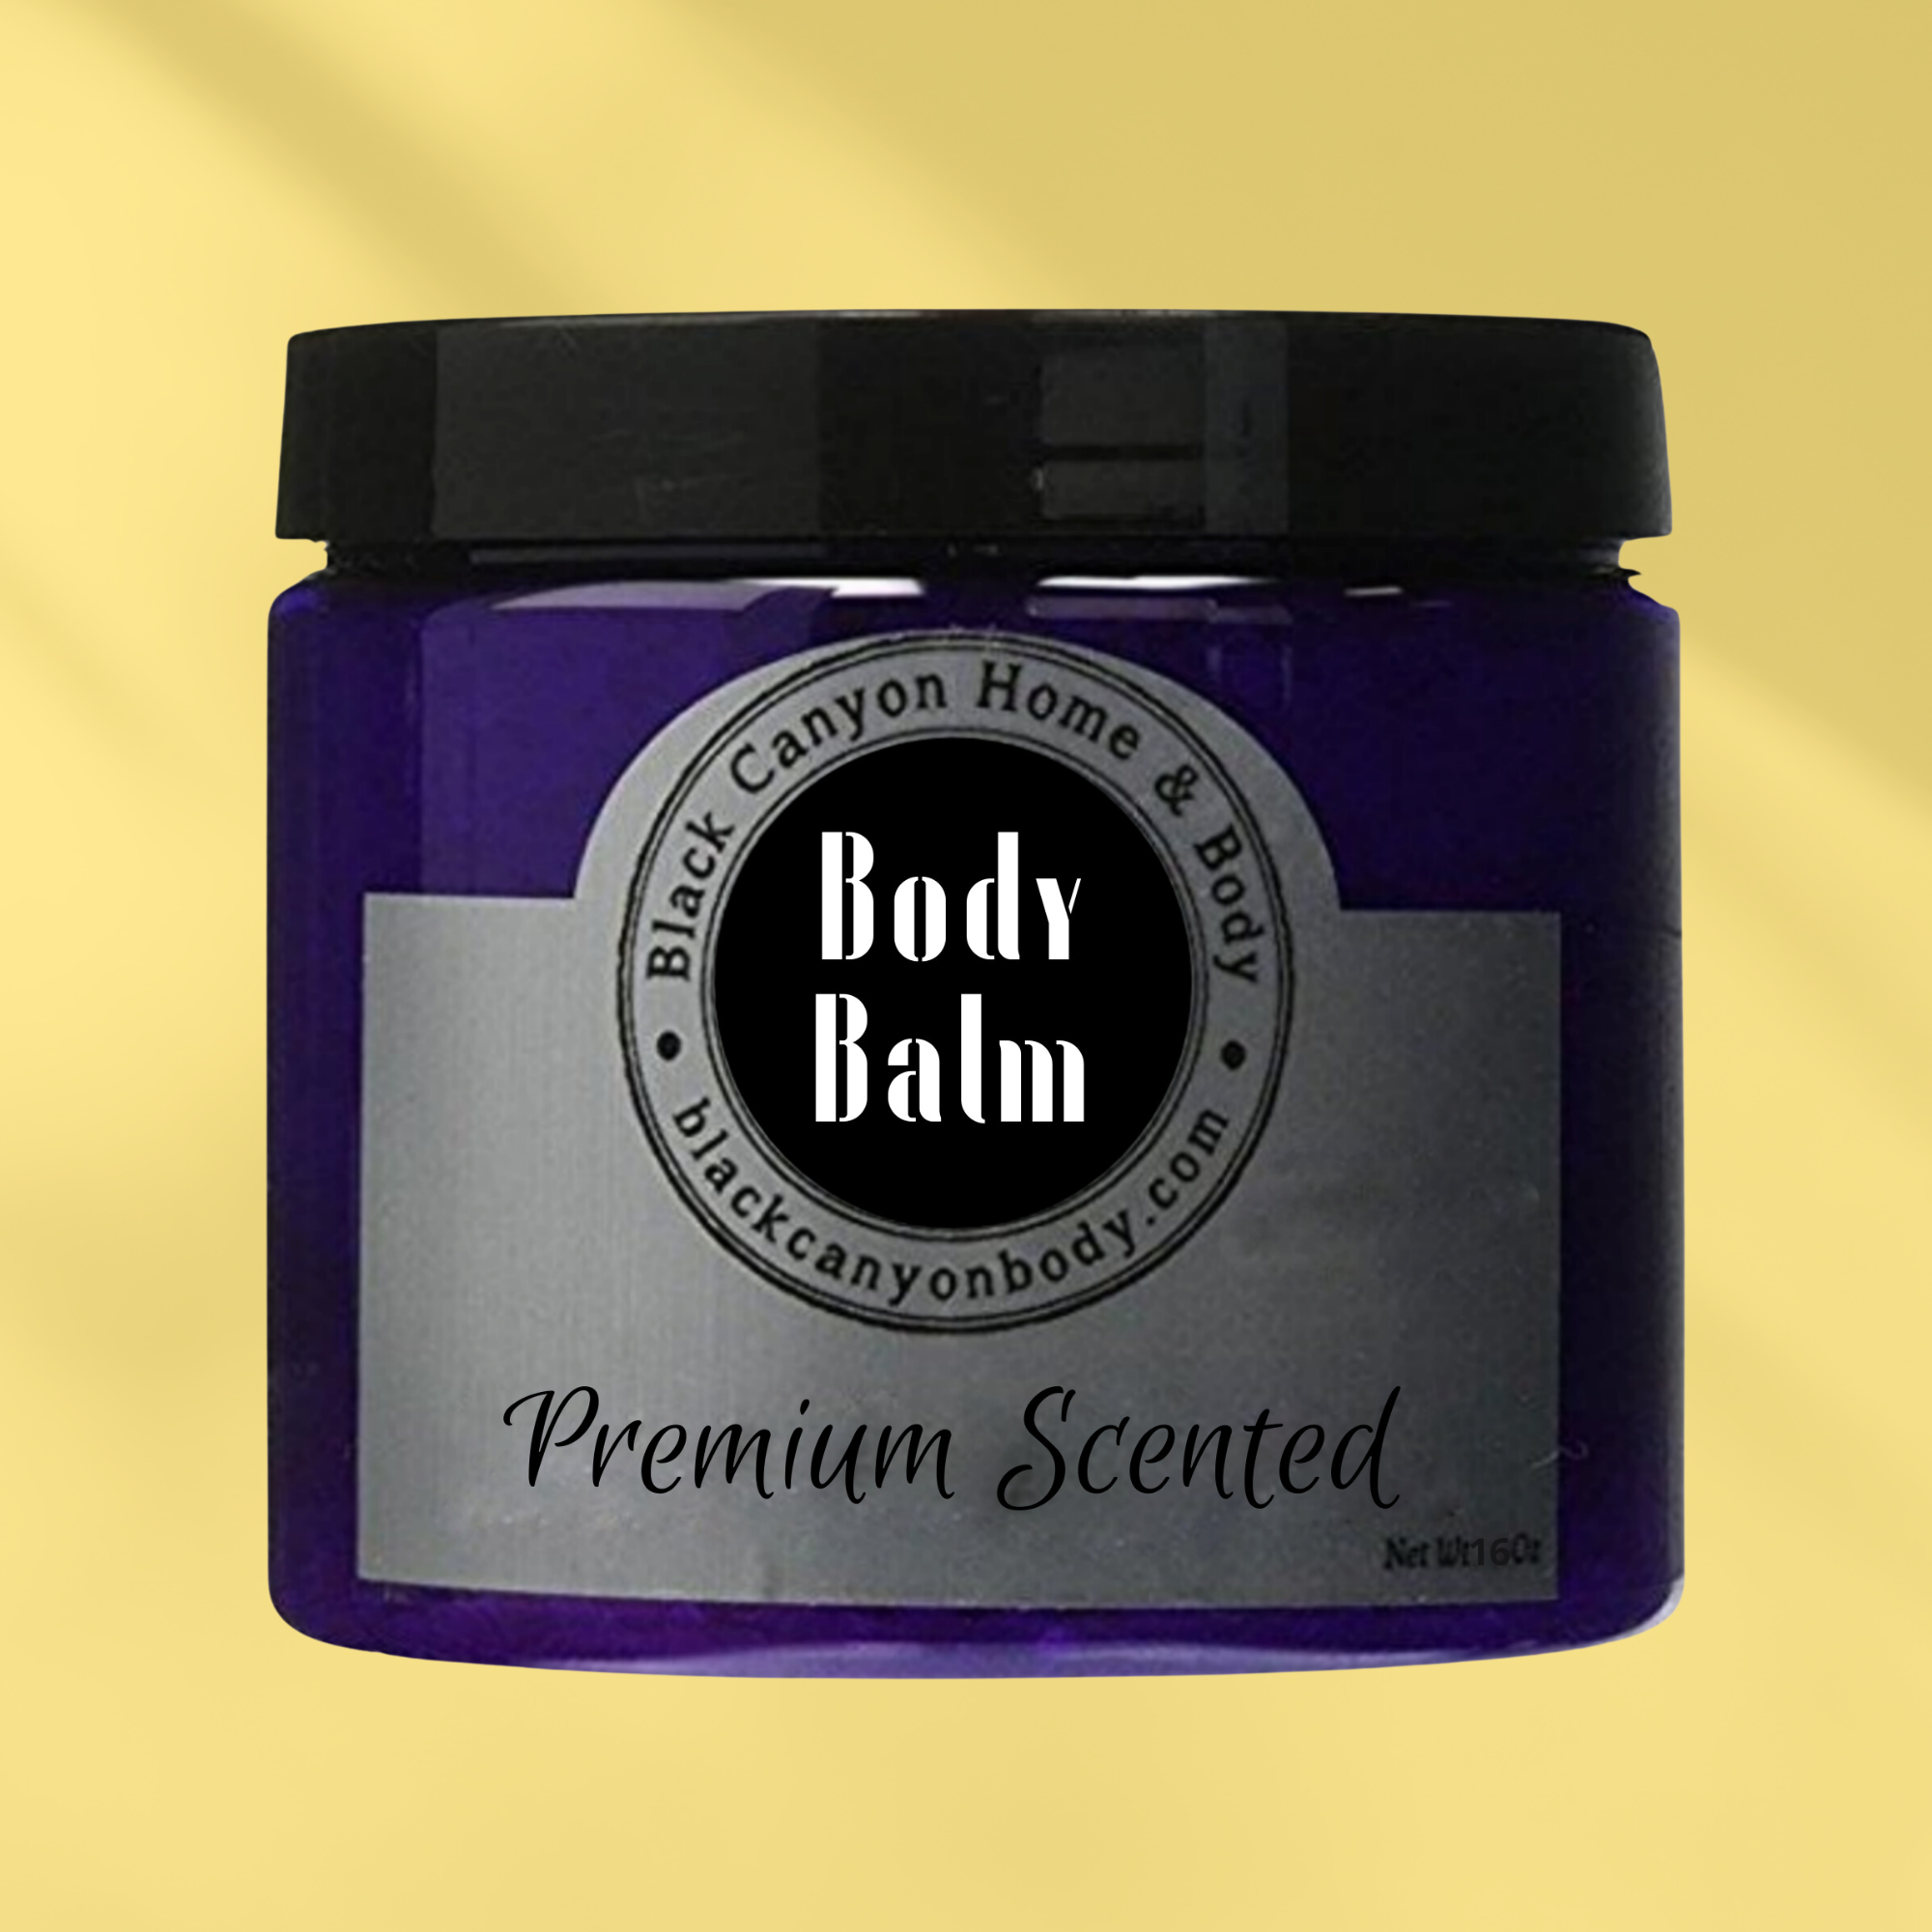 Black Canyon Raspberry Mint & Balsam Scented Natural Body Balm with Shea